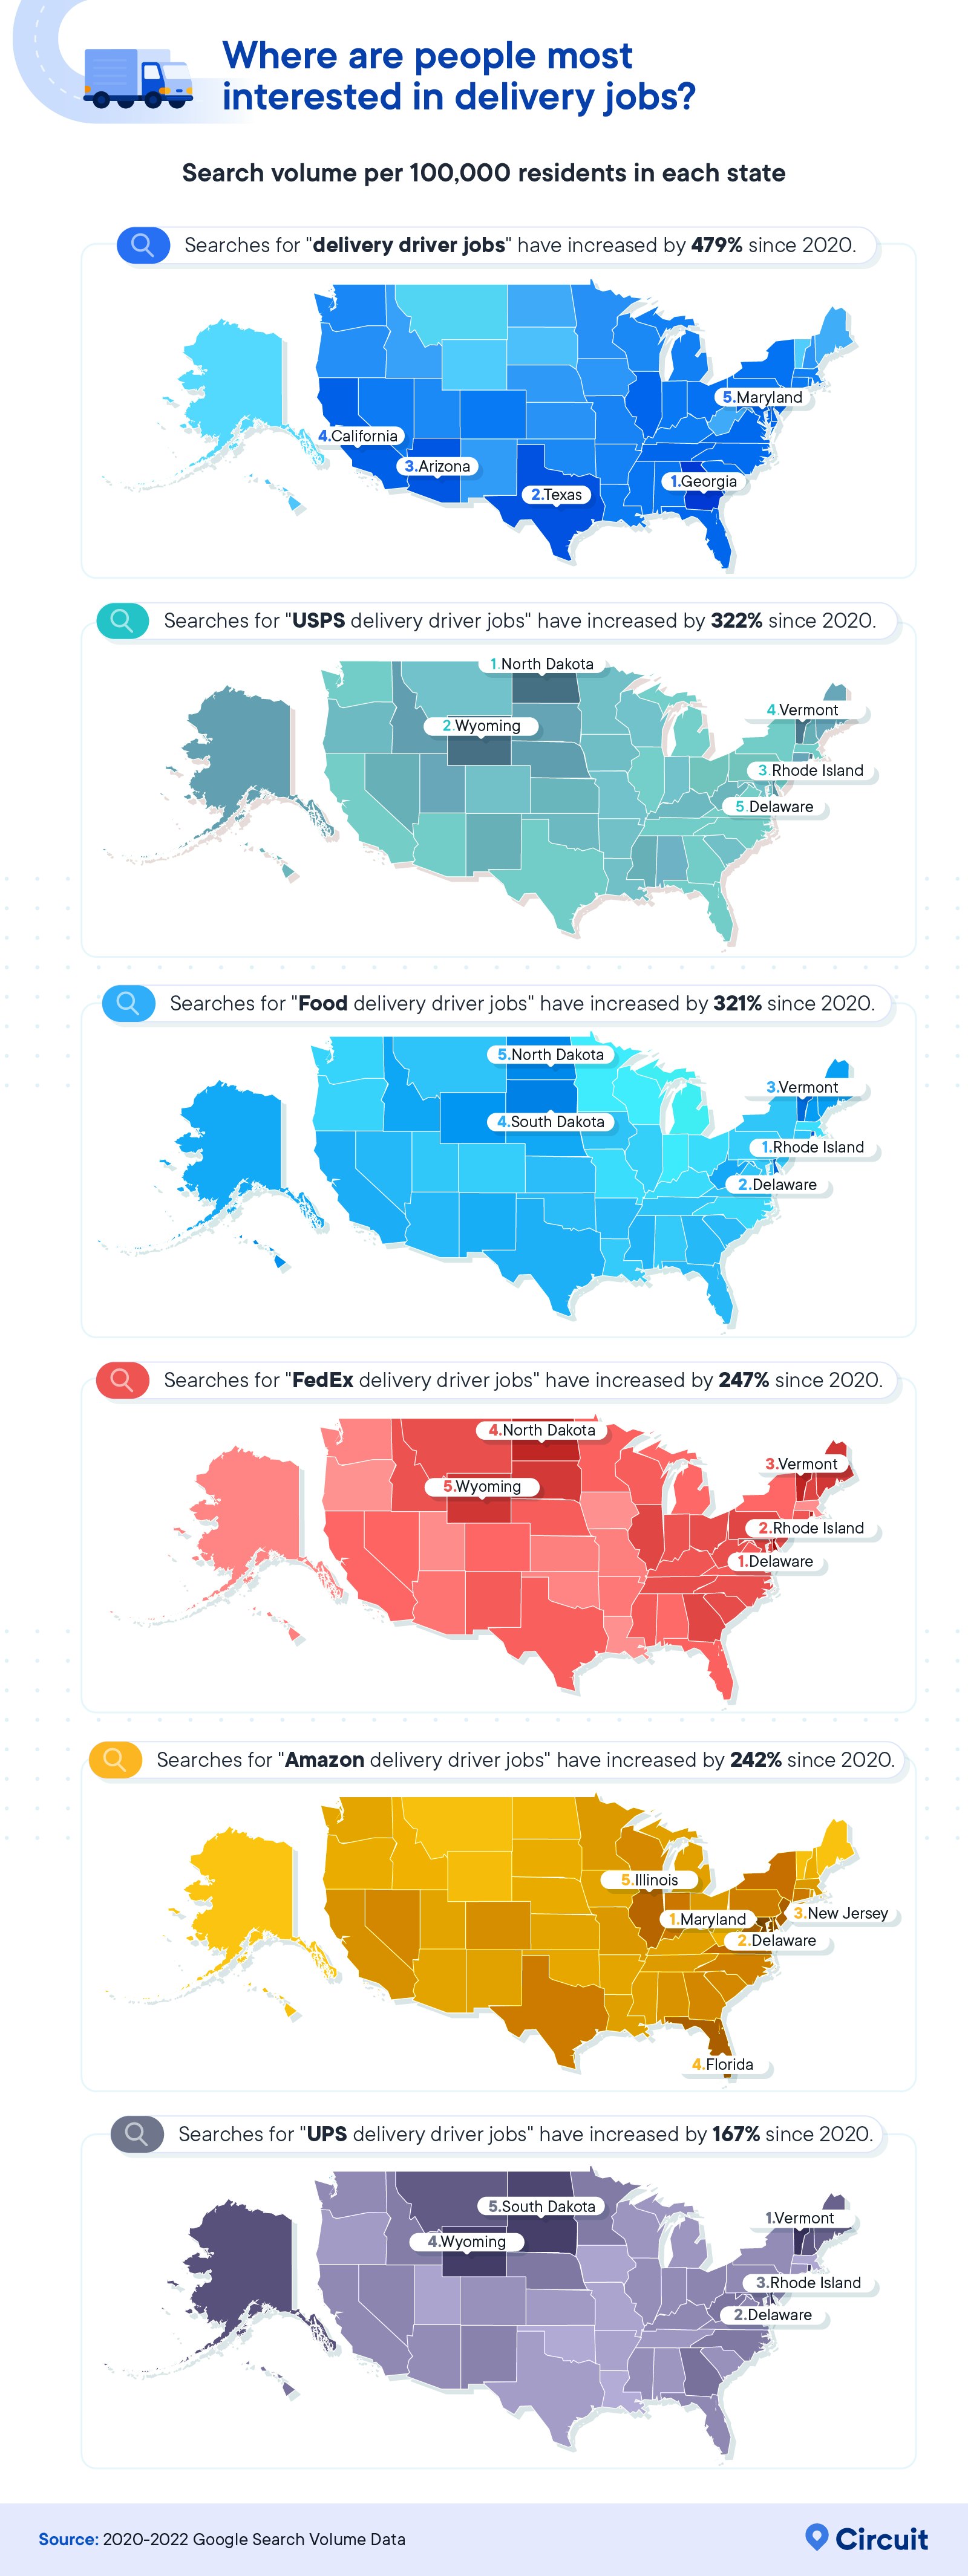 Infographic to analyze where people are most interested in delivery jobs